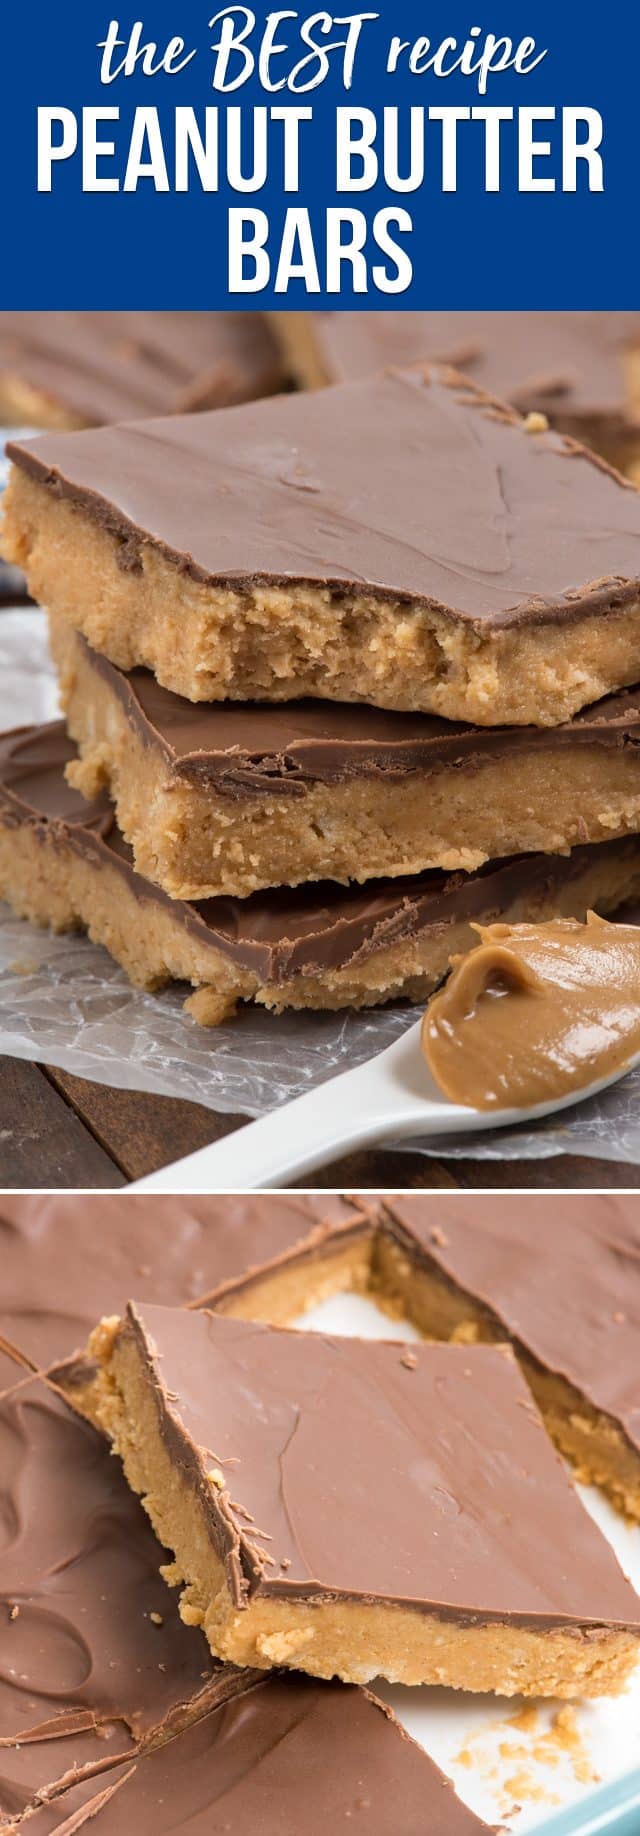 collage of no bake peanut butter bars